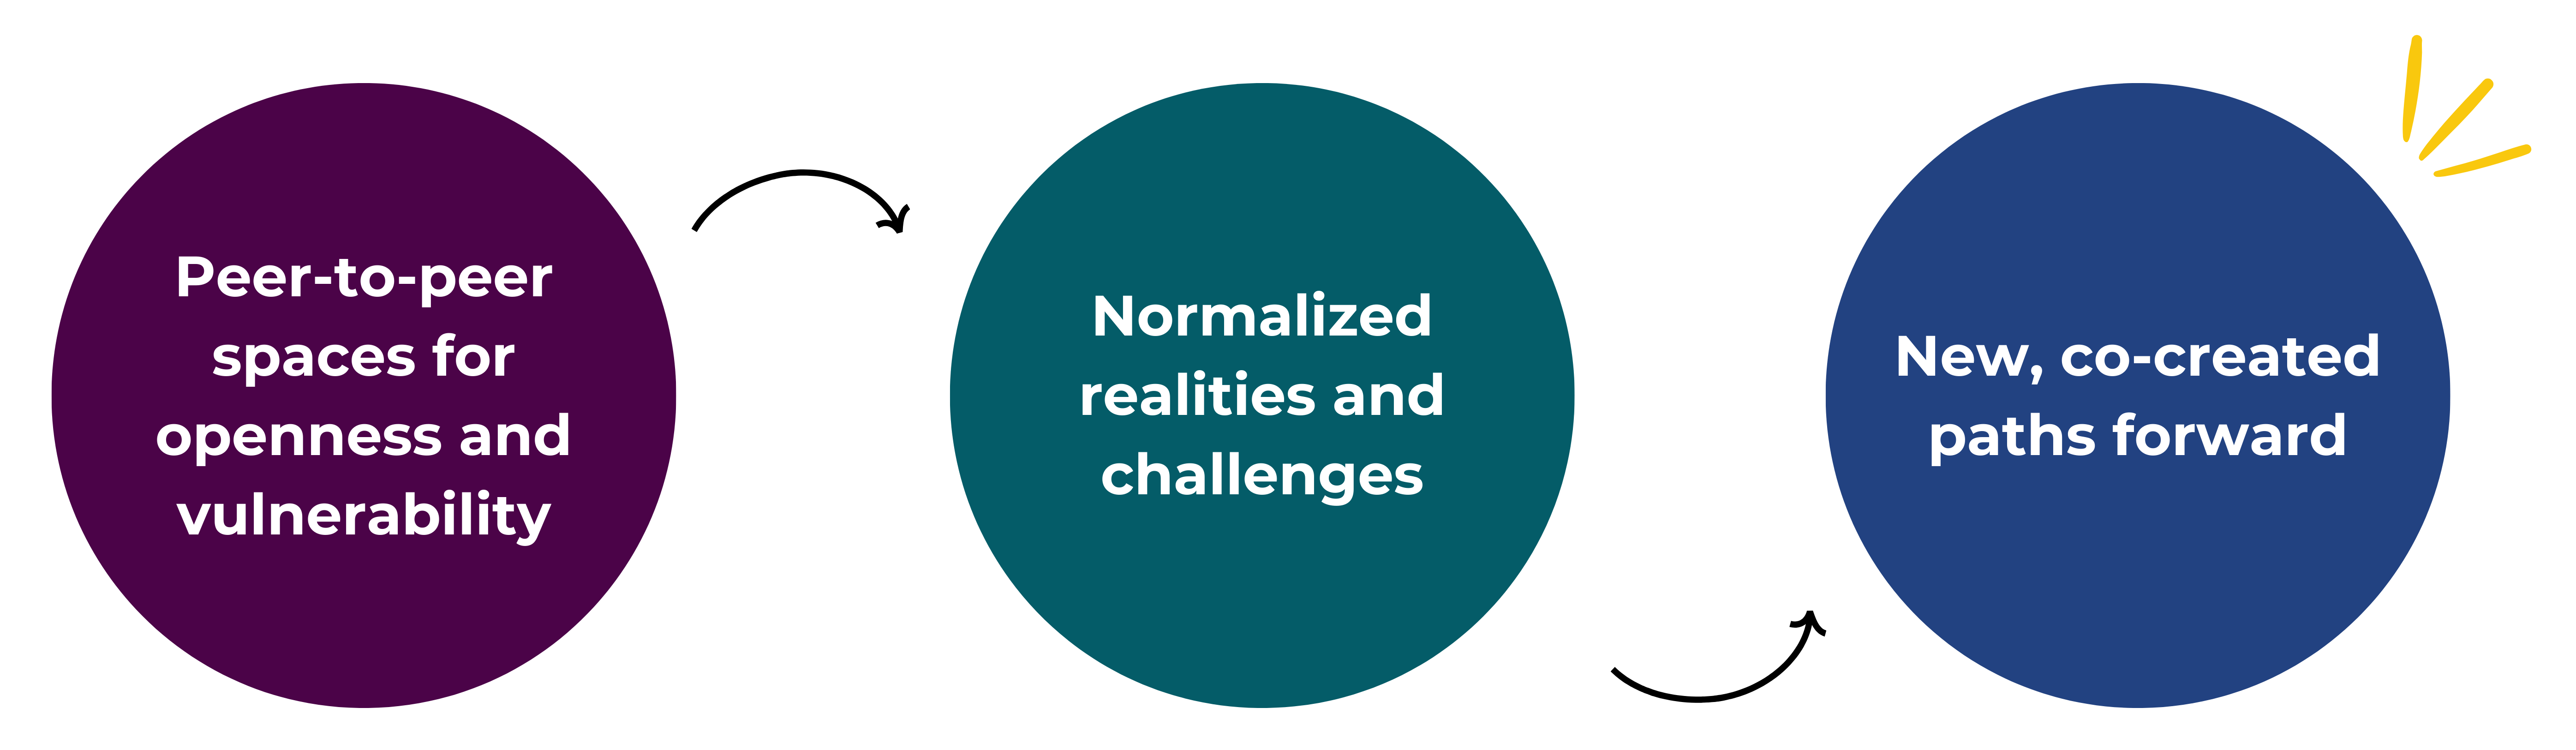 A plum colored circle with the words "Peer-to-peer spaces for openness and vulnerability" with a black arrow pointing to a green blue colored circle that says "Normalized realties and challenges" with an arrow pointing to a dark blue colored circle that